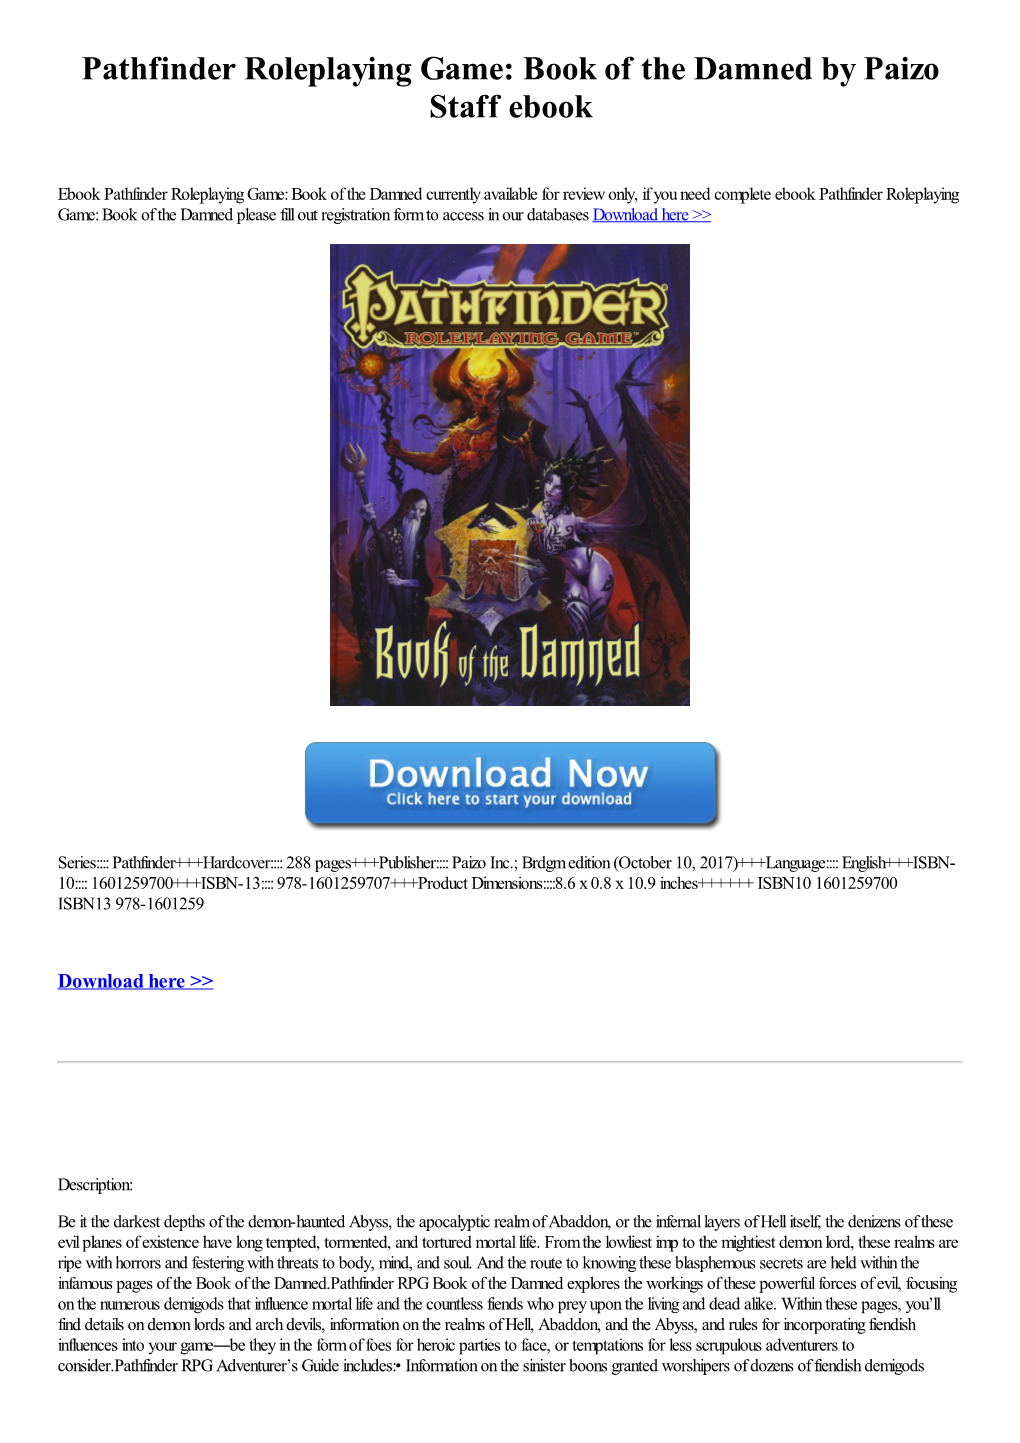 Pathfinder Roleplaying Game: Book of the Damned by Paizo Staff Ebook